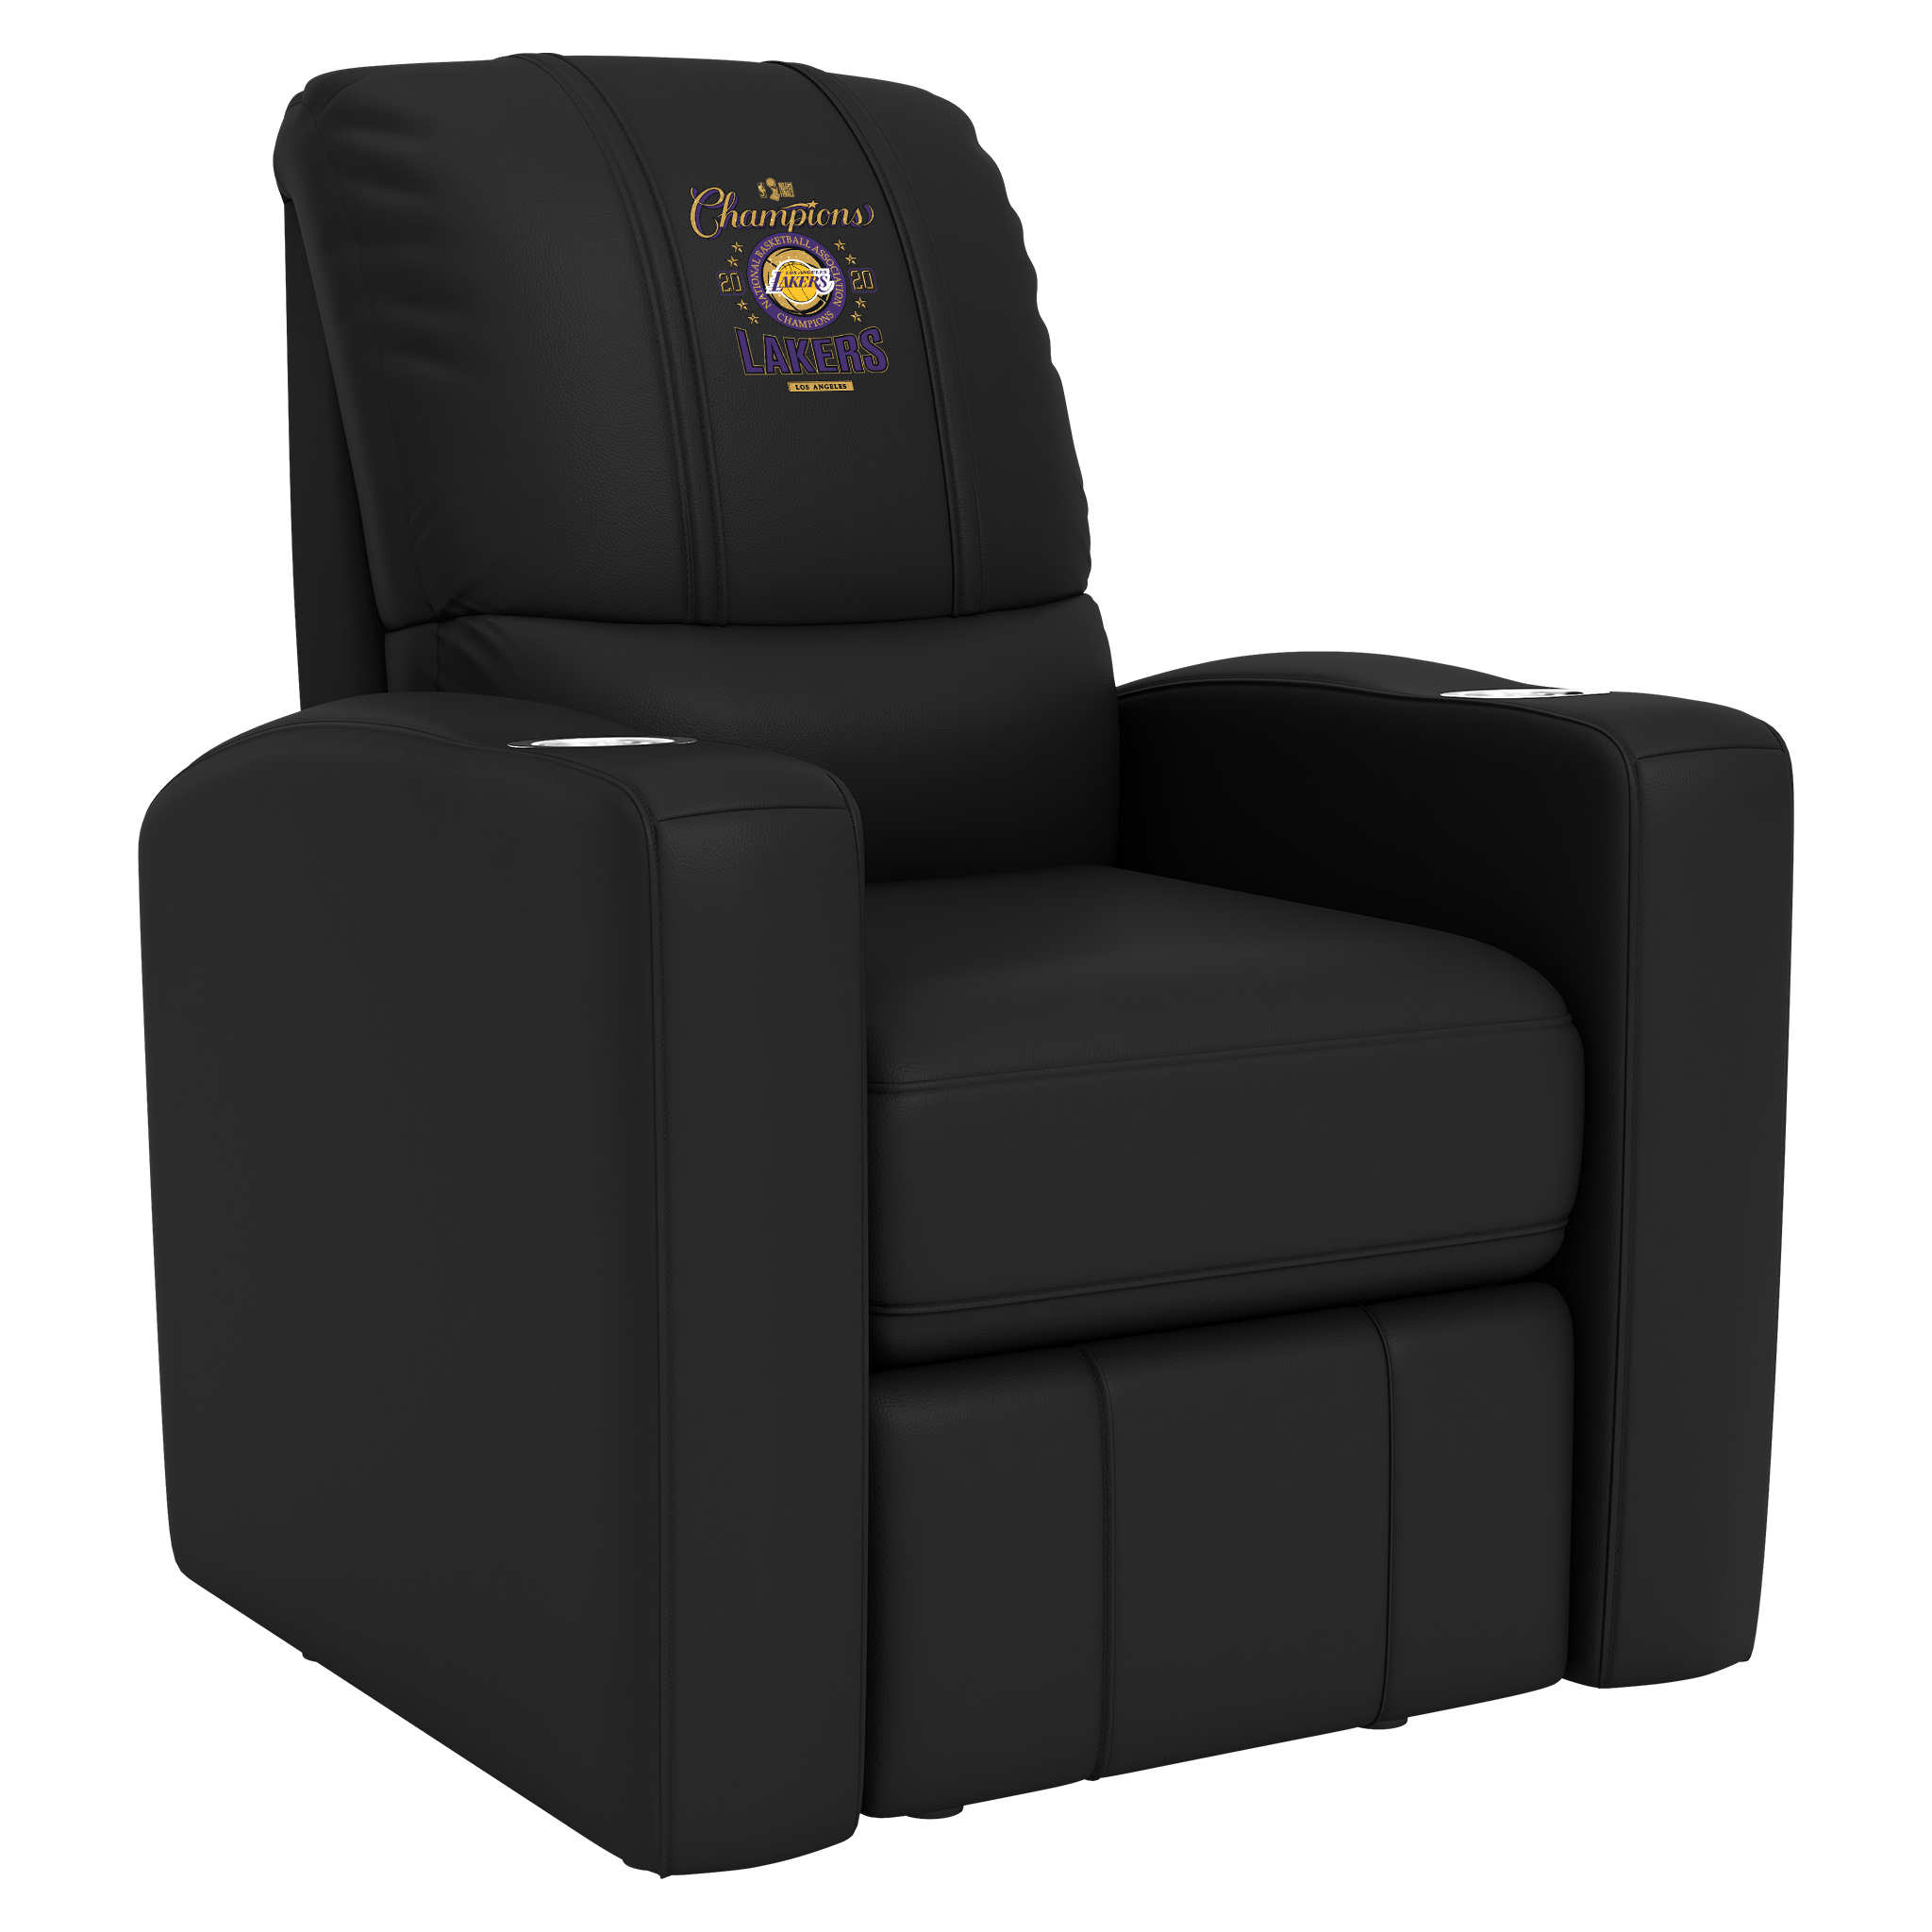 Los Angeles Lakers Stealth Recliner with Los Angeles Lakers 2020 Champions Logo